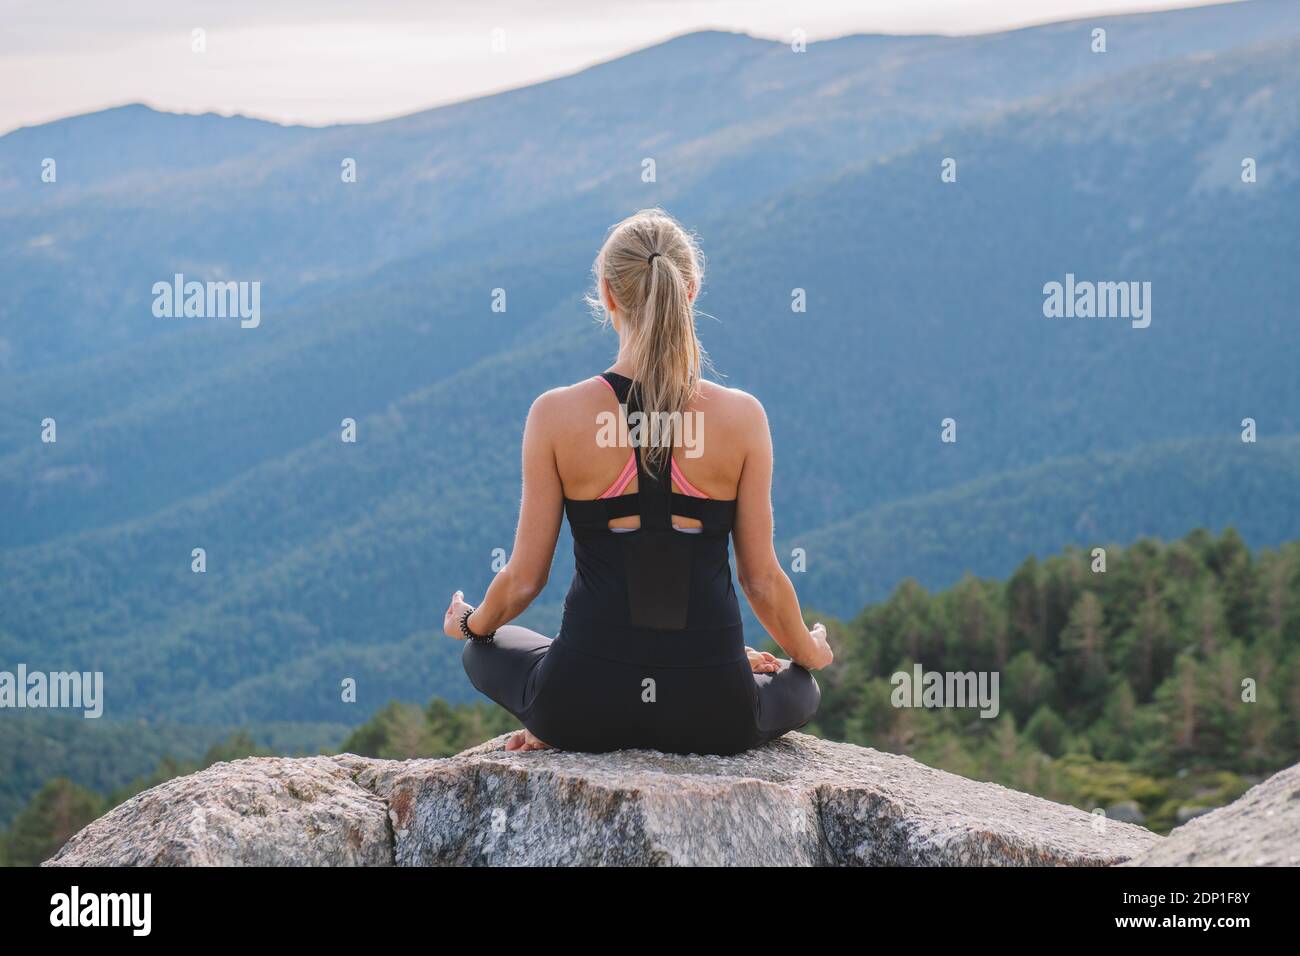 meditation yoga postures in nature inner peace Stock Photo